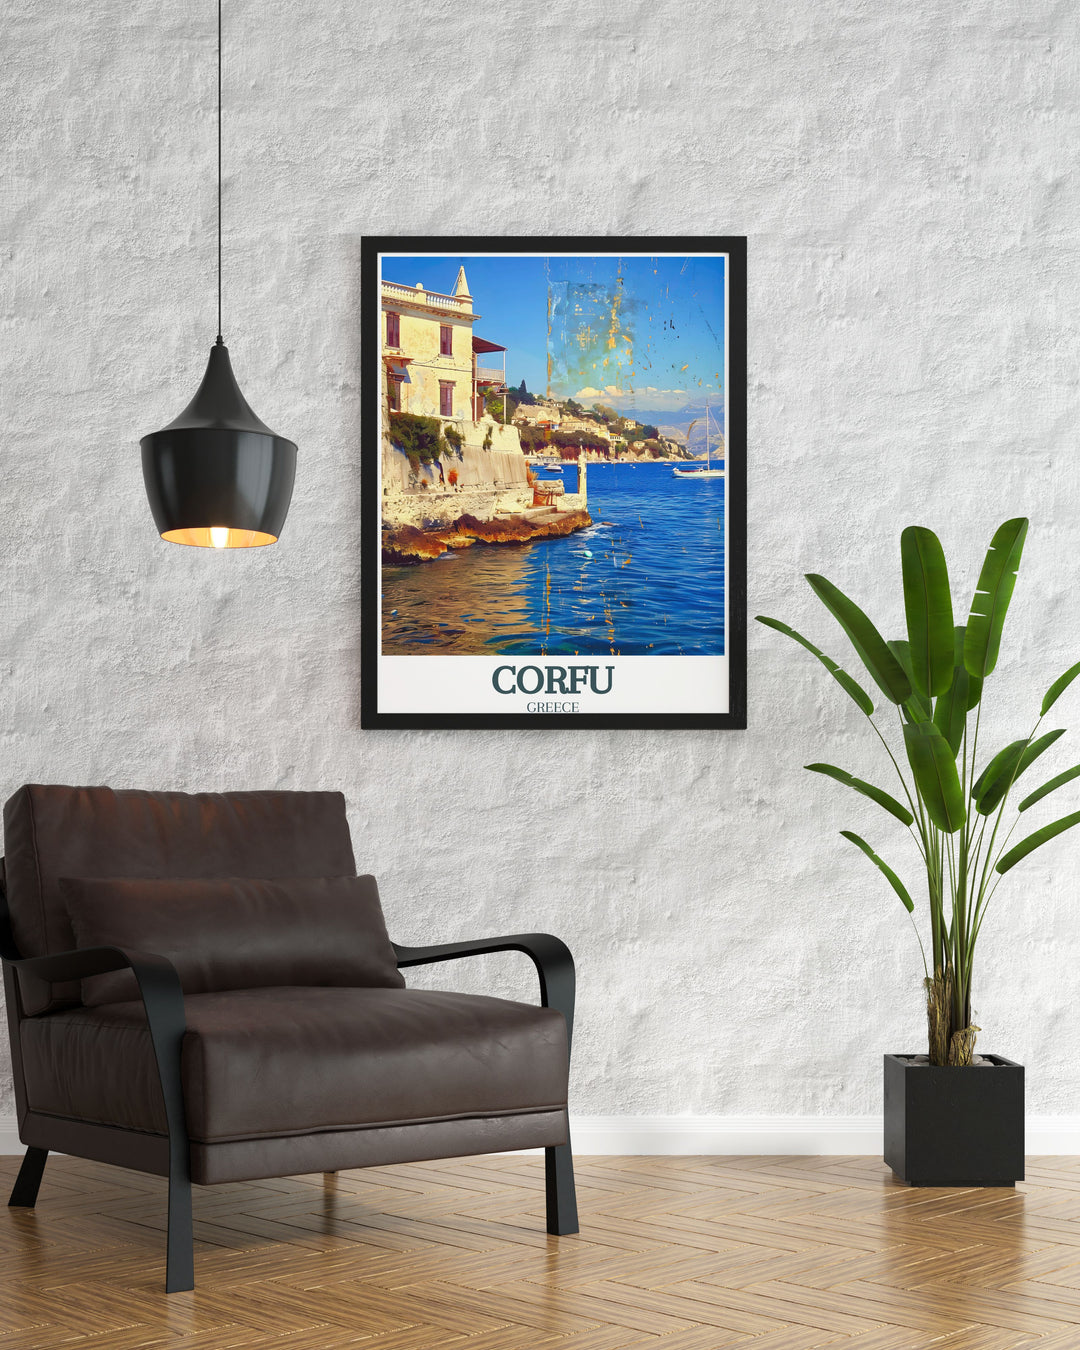 Old fortress of Corfu Ionian Sea artwork highlighting the historical significance and natural beauty of Corfu Greece Island a perfect addition to any art collection or home decor that seeks to capture the essence of Corfu Greek art and the tranquility of the Mediterranean